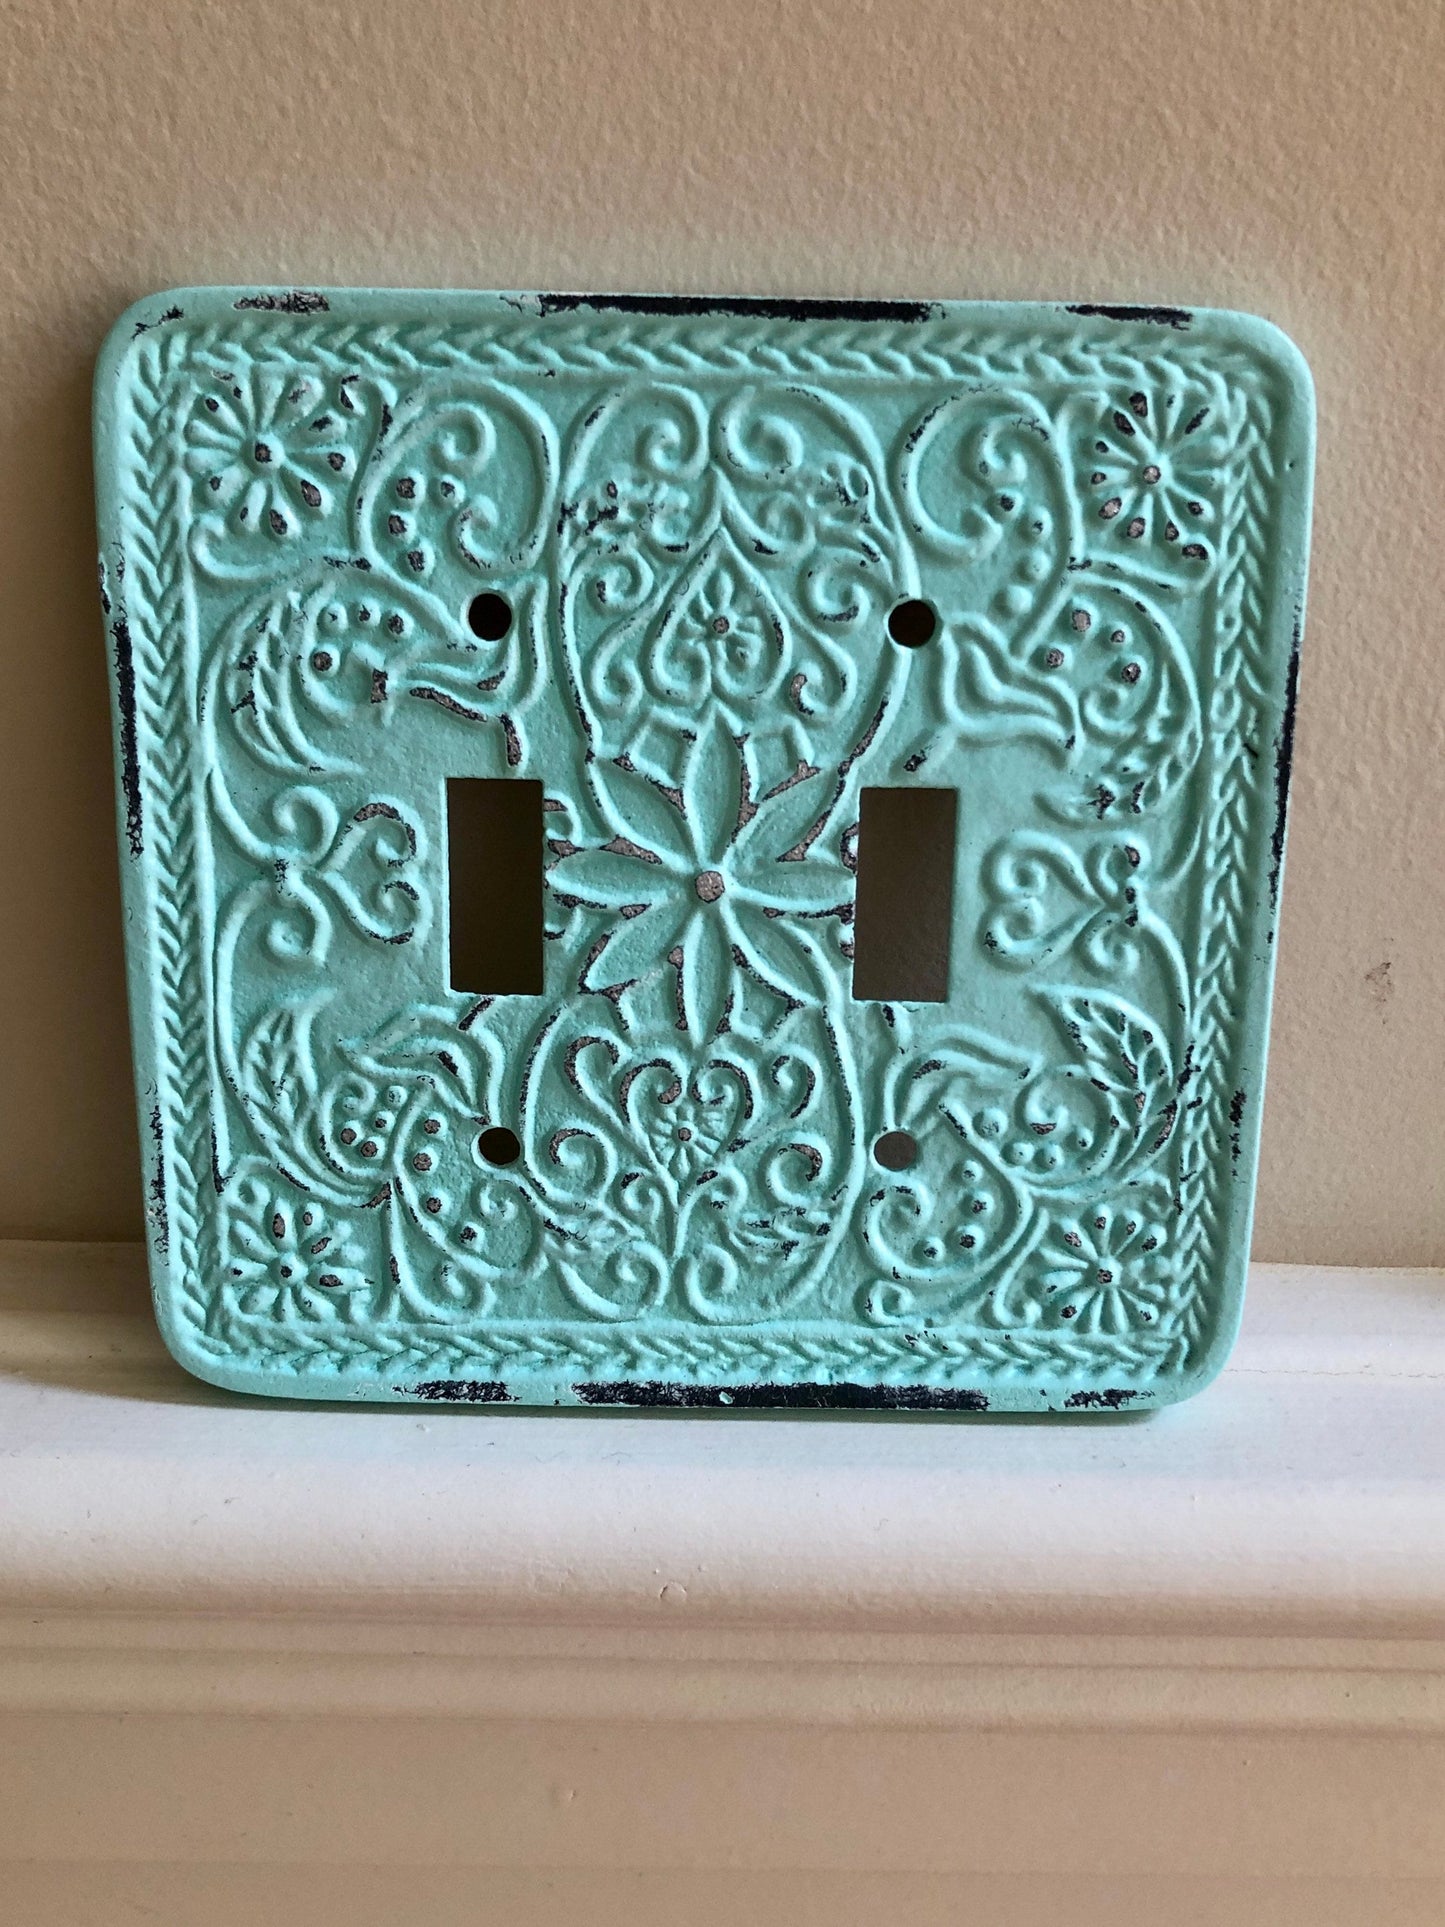 SALE/Metal Double Light Switch Cover/single light switch cover/Nursery/Bedroom/Light Switch Plate/Pick color/Outlet Cover/